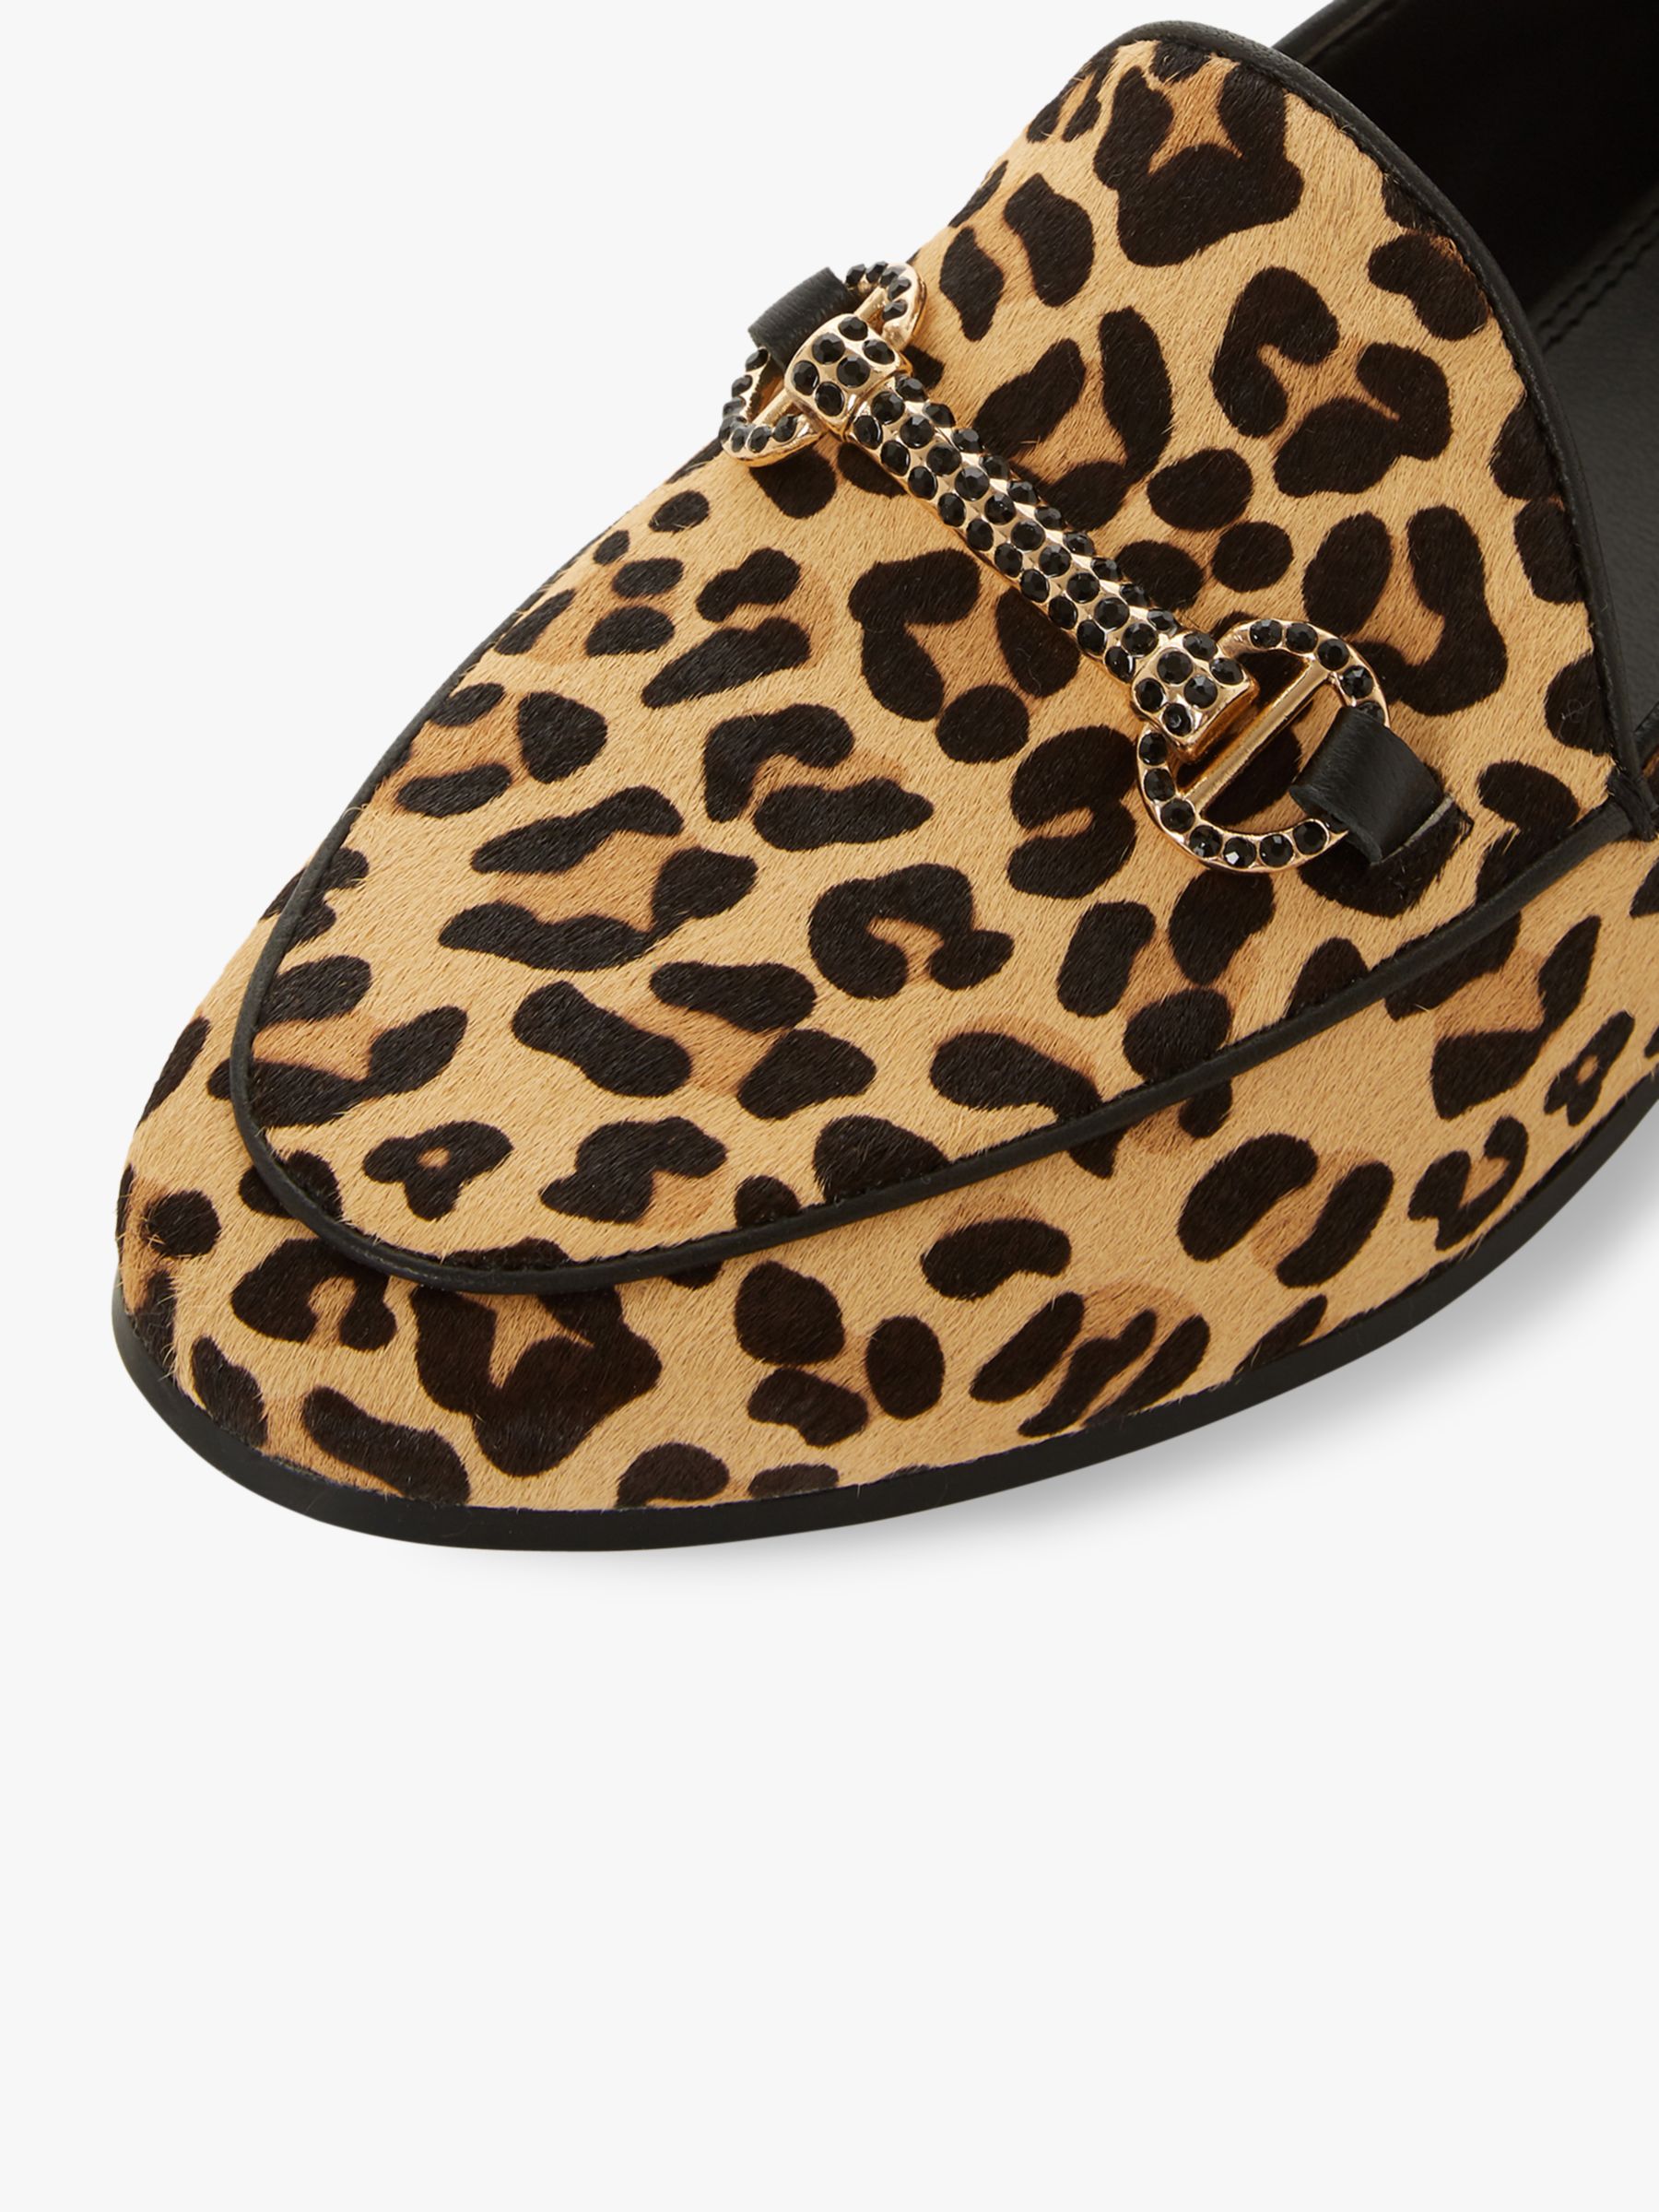 Dune Guiltty Slip On Loafers, Leopard Leather